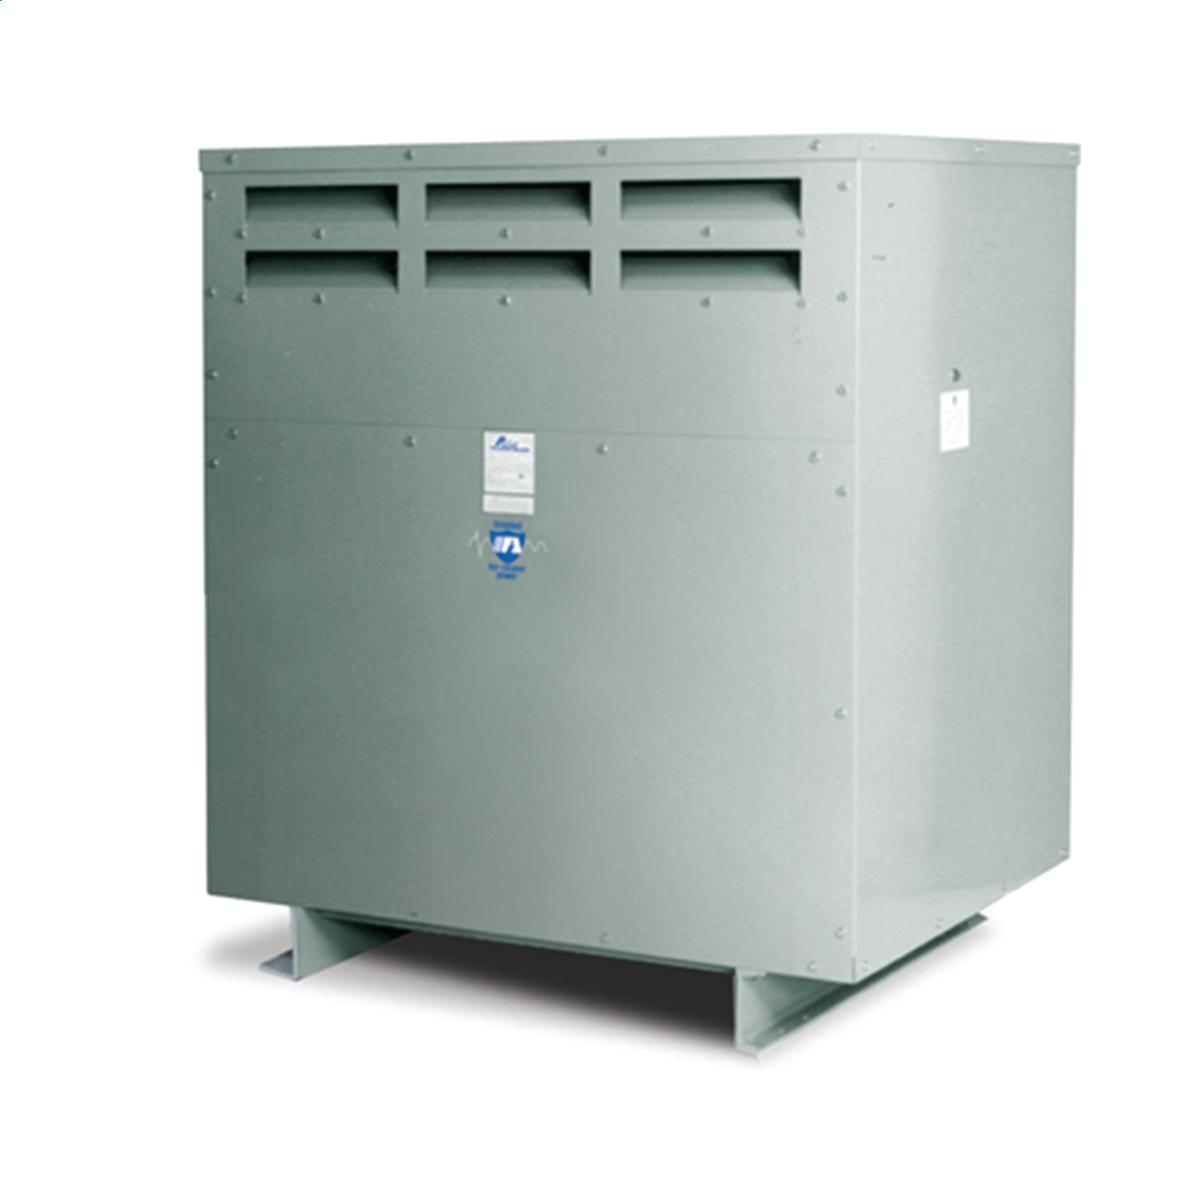 Hubbell WI015M14 Medium Voltage Transformer - Three Phase, 2400Δ - 600ΔV, 1500kVA  ; Lower operating cost over Liquid-filled ; No additional fireproofing or venting ; Long life expectancy ; Smaller, lighter easy to maintain